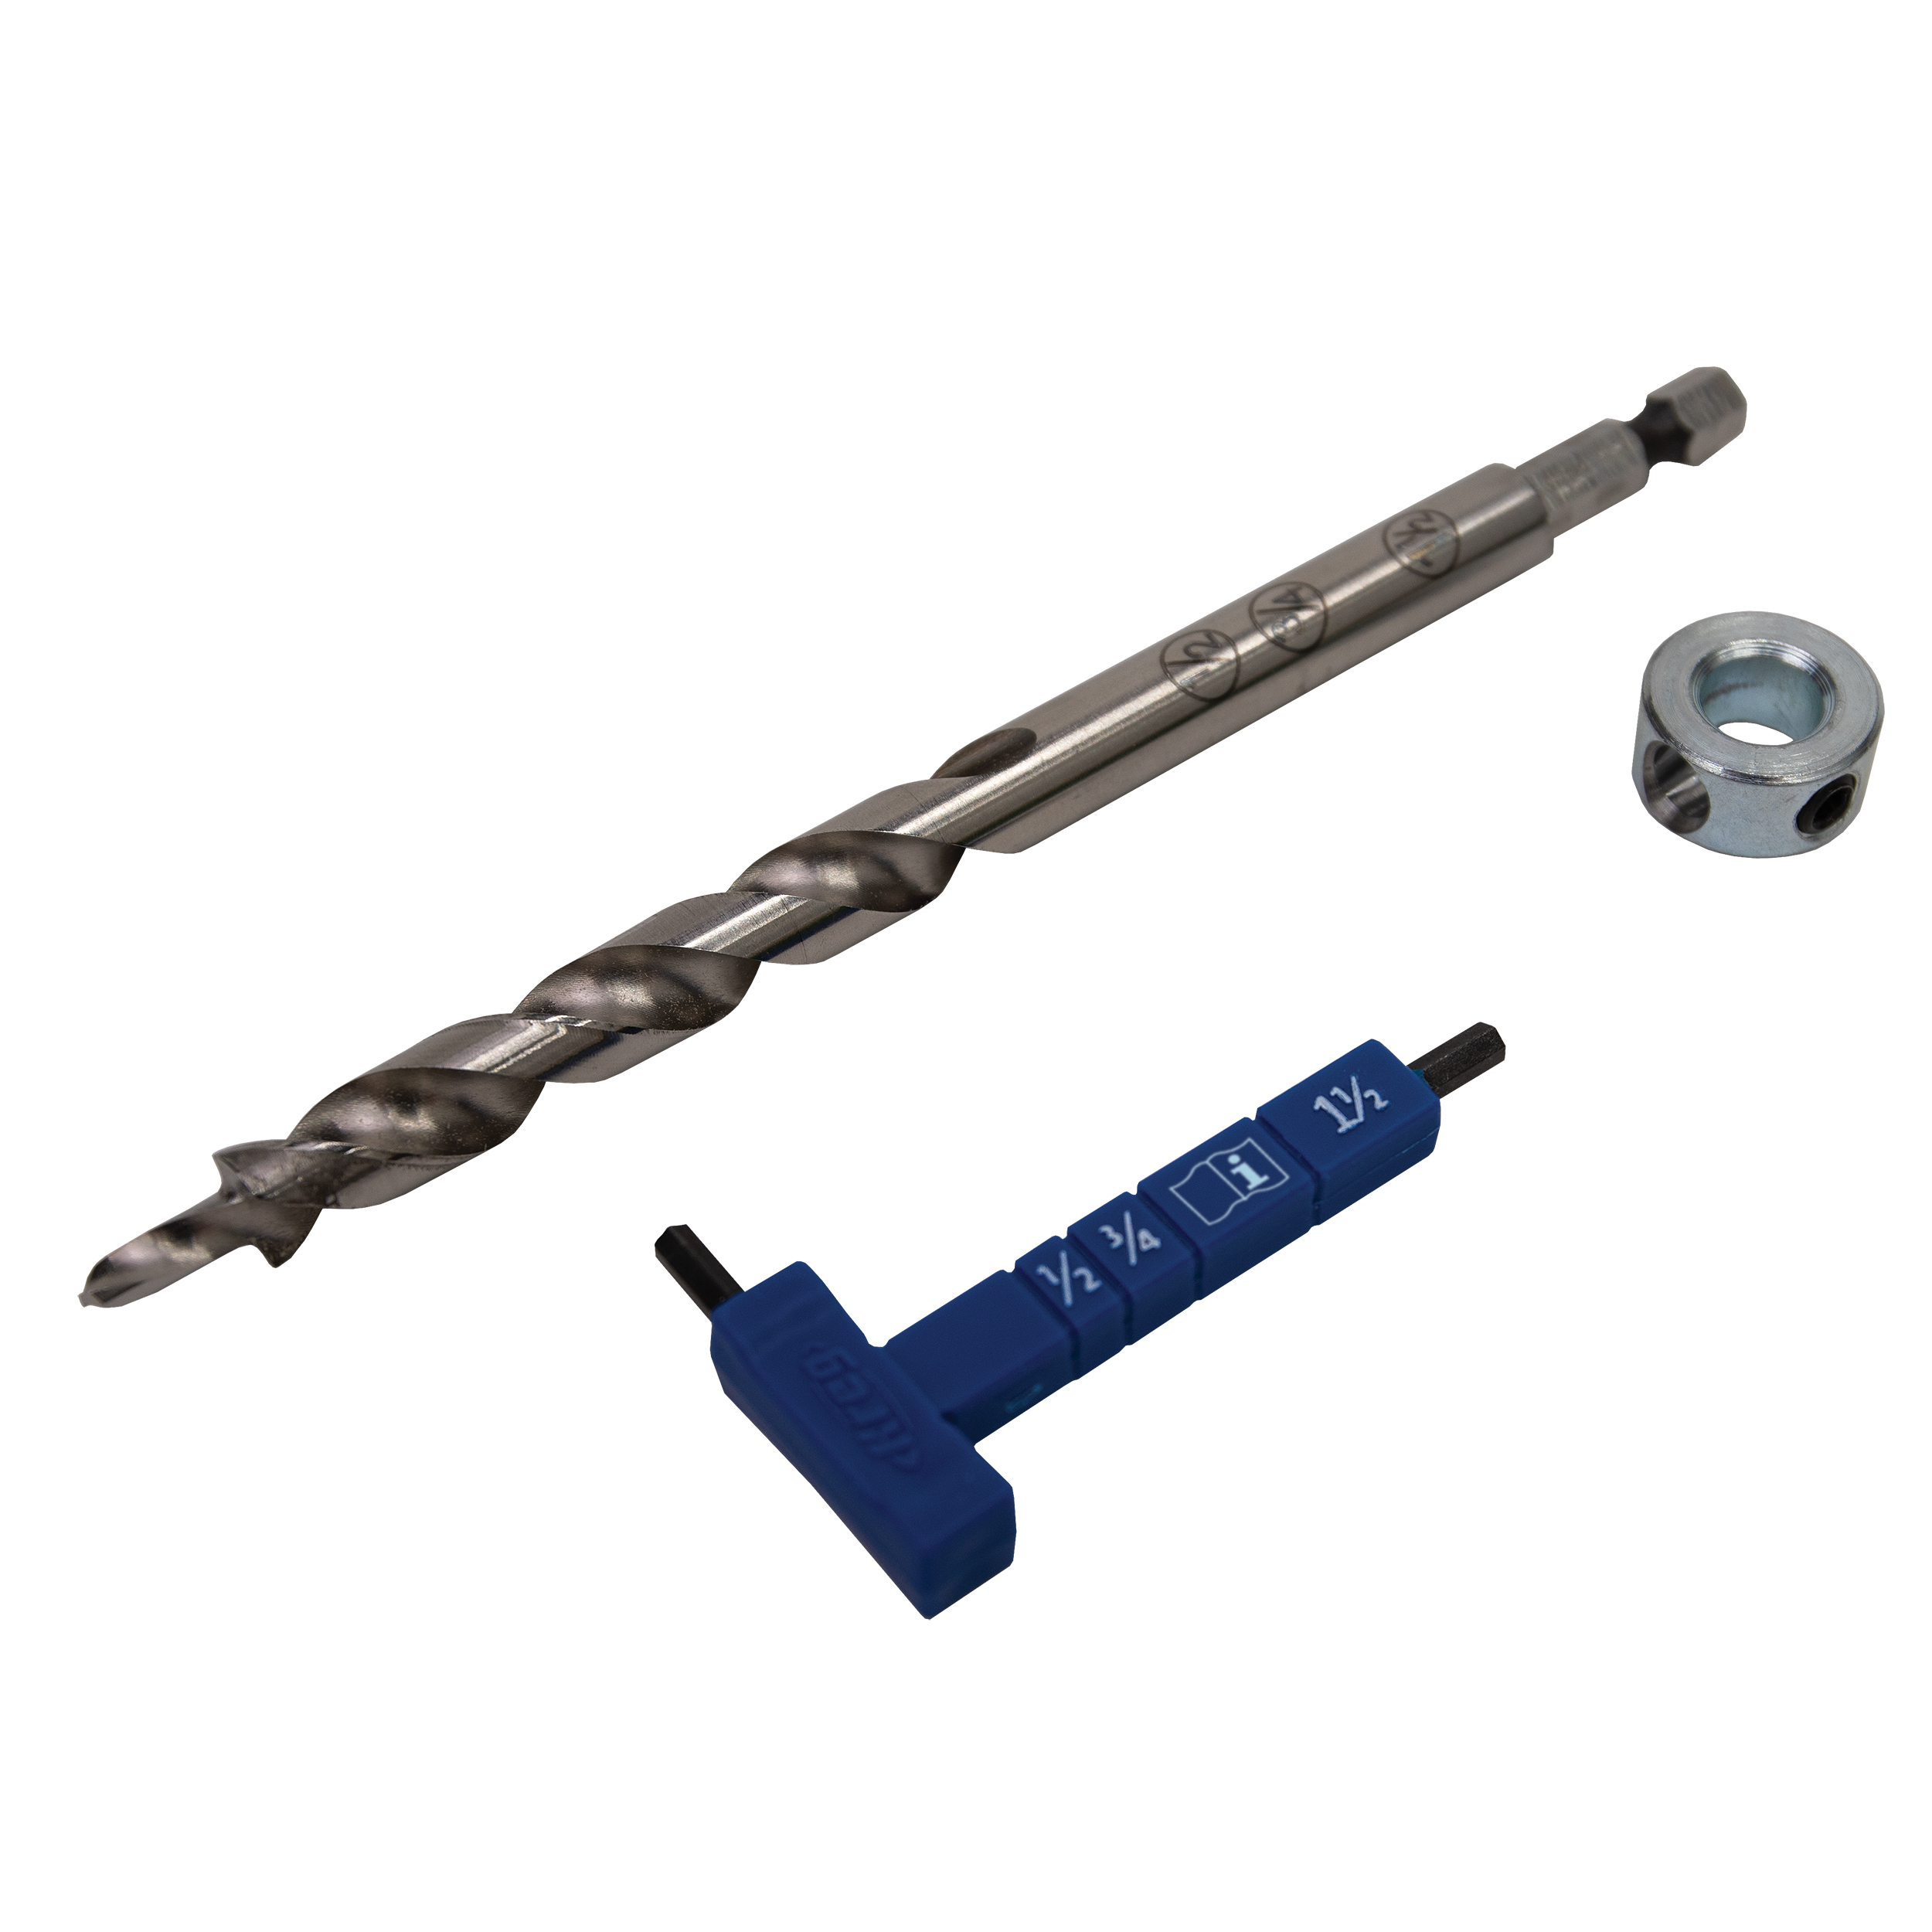 Easy-set Pocket-hole Drill Bit, Stop Collar And Hex Gauge